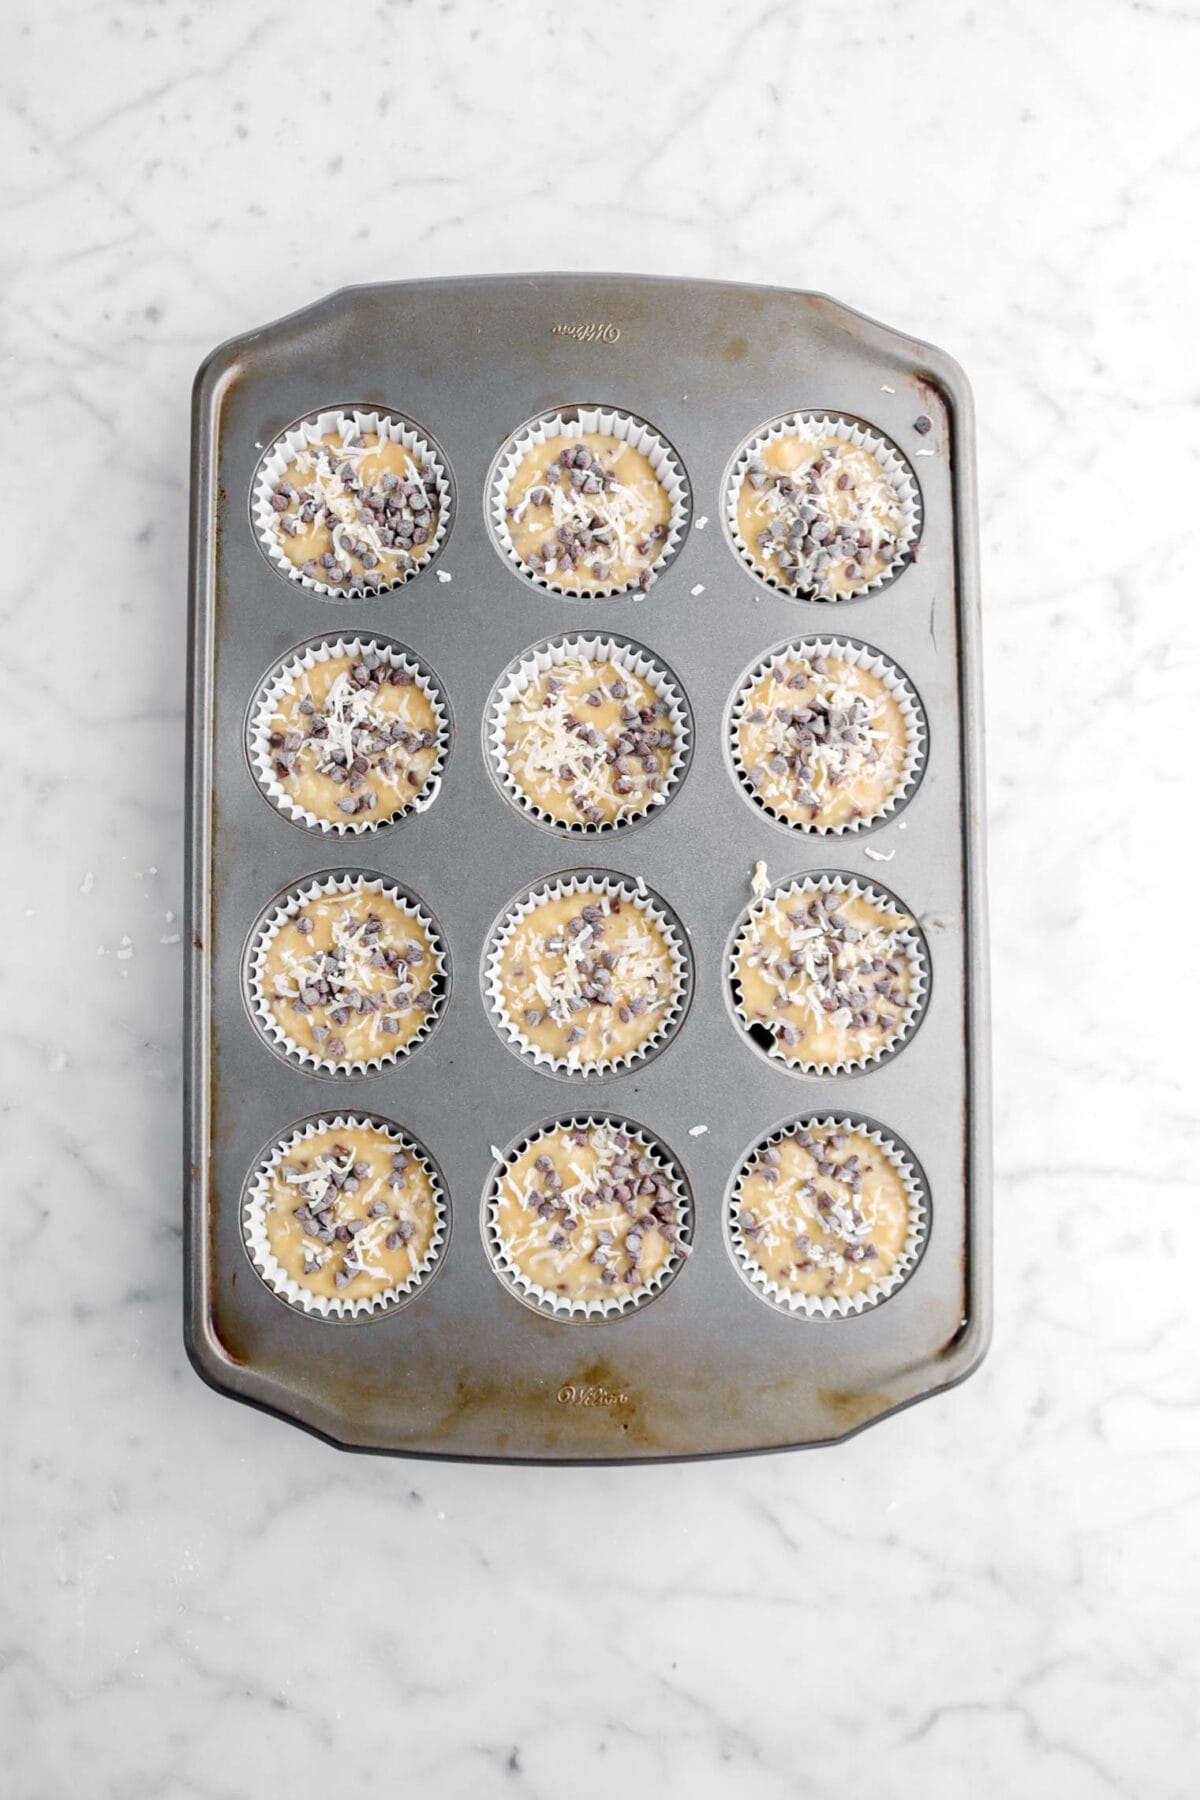 mini chocolate chips and shredded coconut added on top of muffin batter.